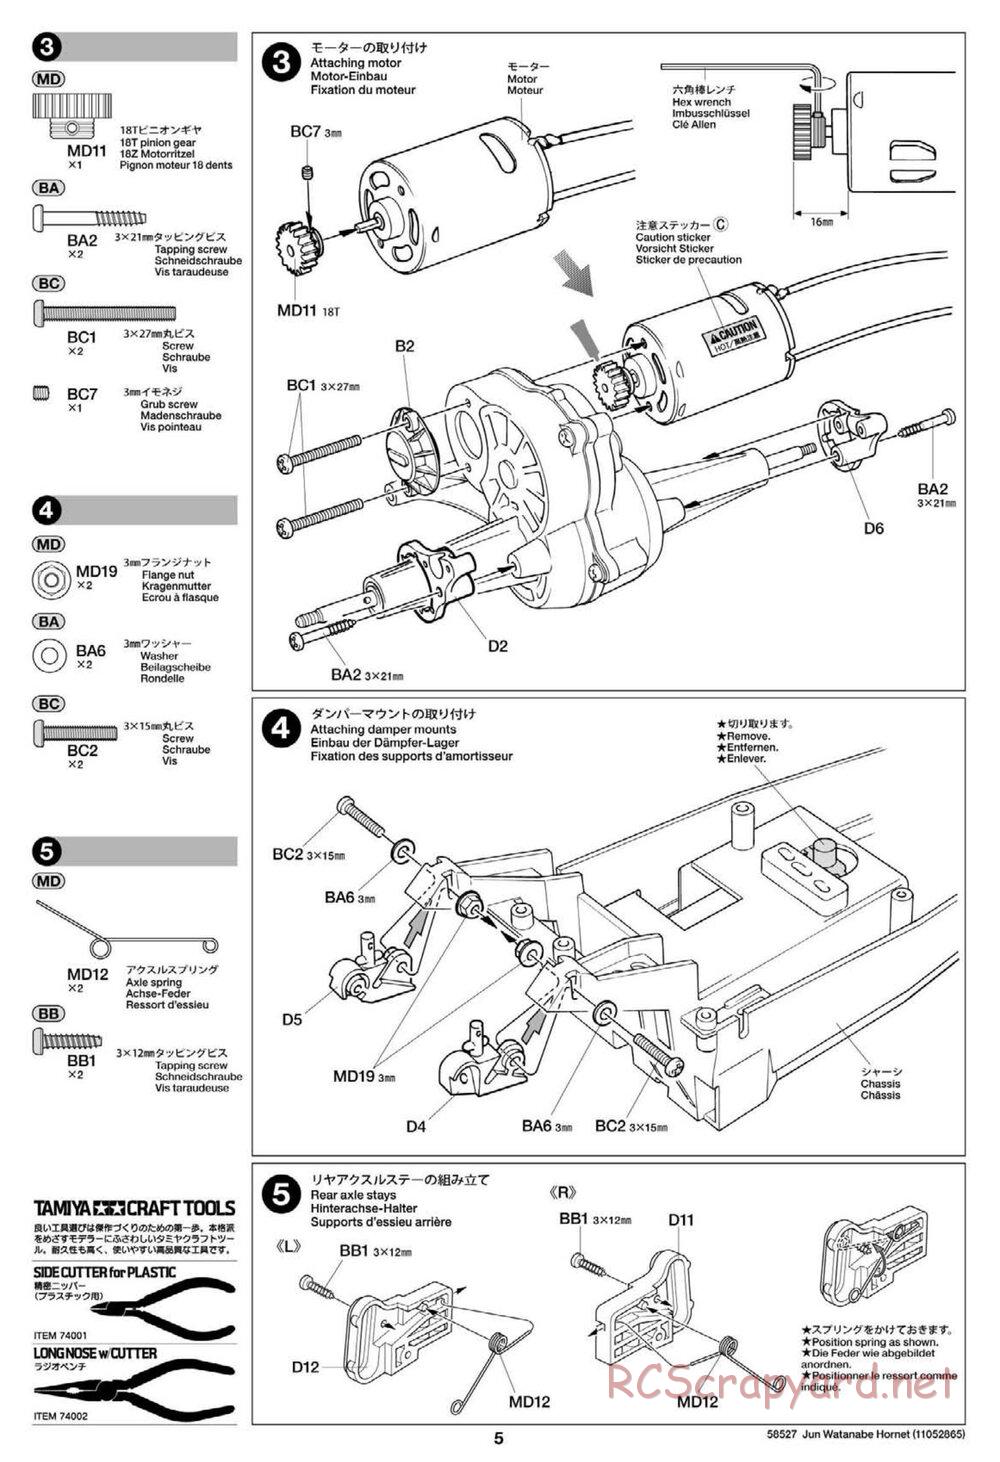 Tamiya - The Hornet by Jun Watanabe - GH Chassis - Manual - Page 5